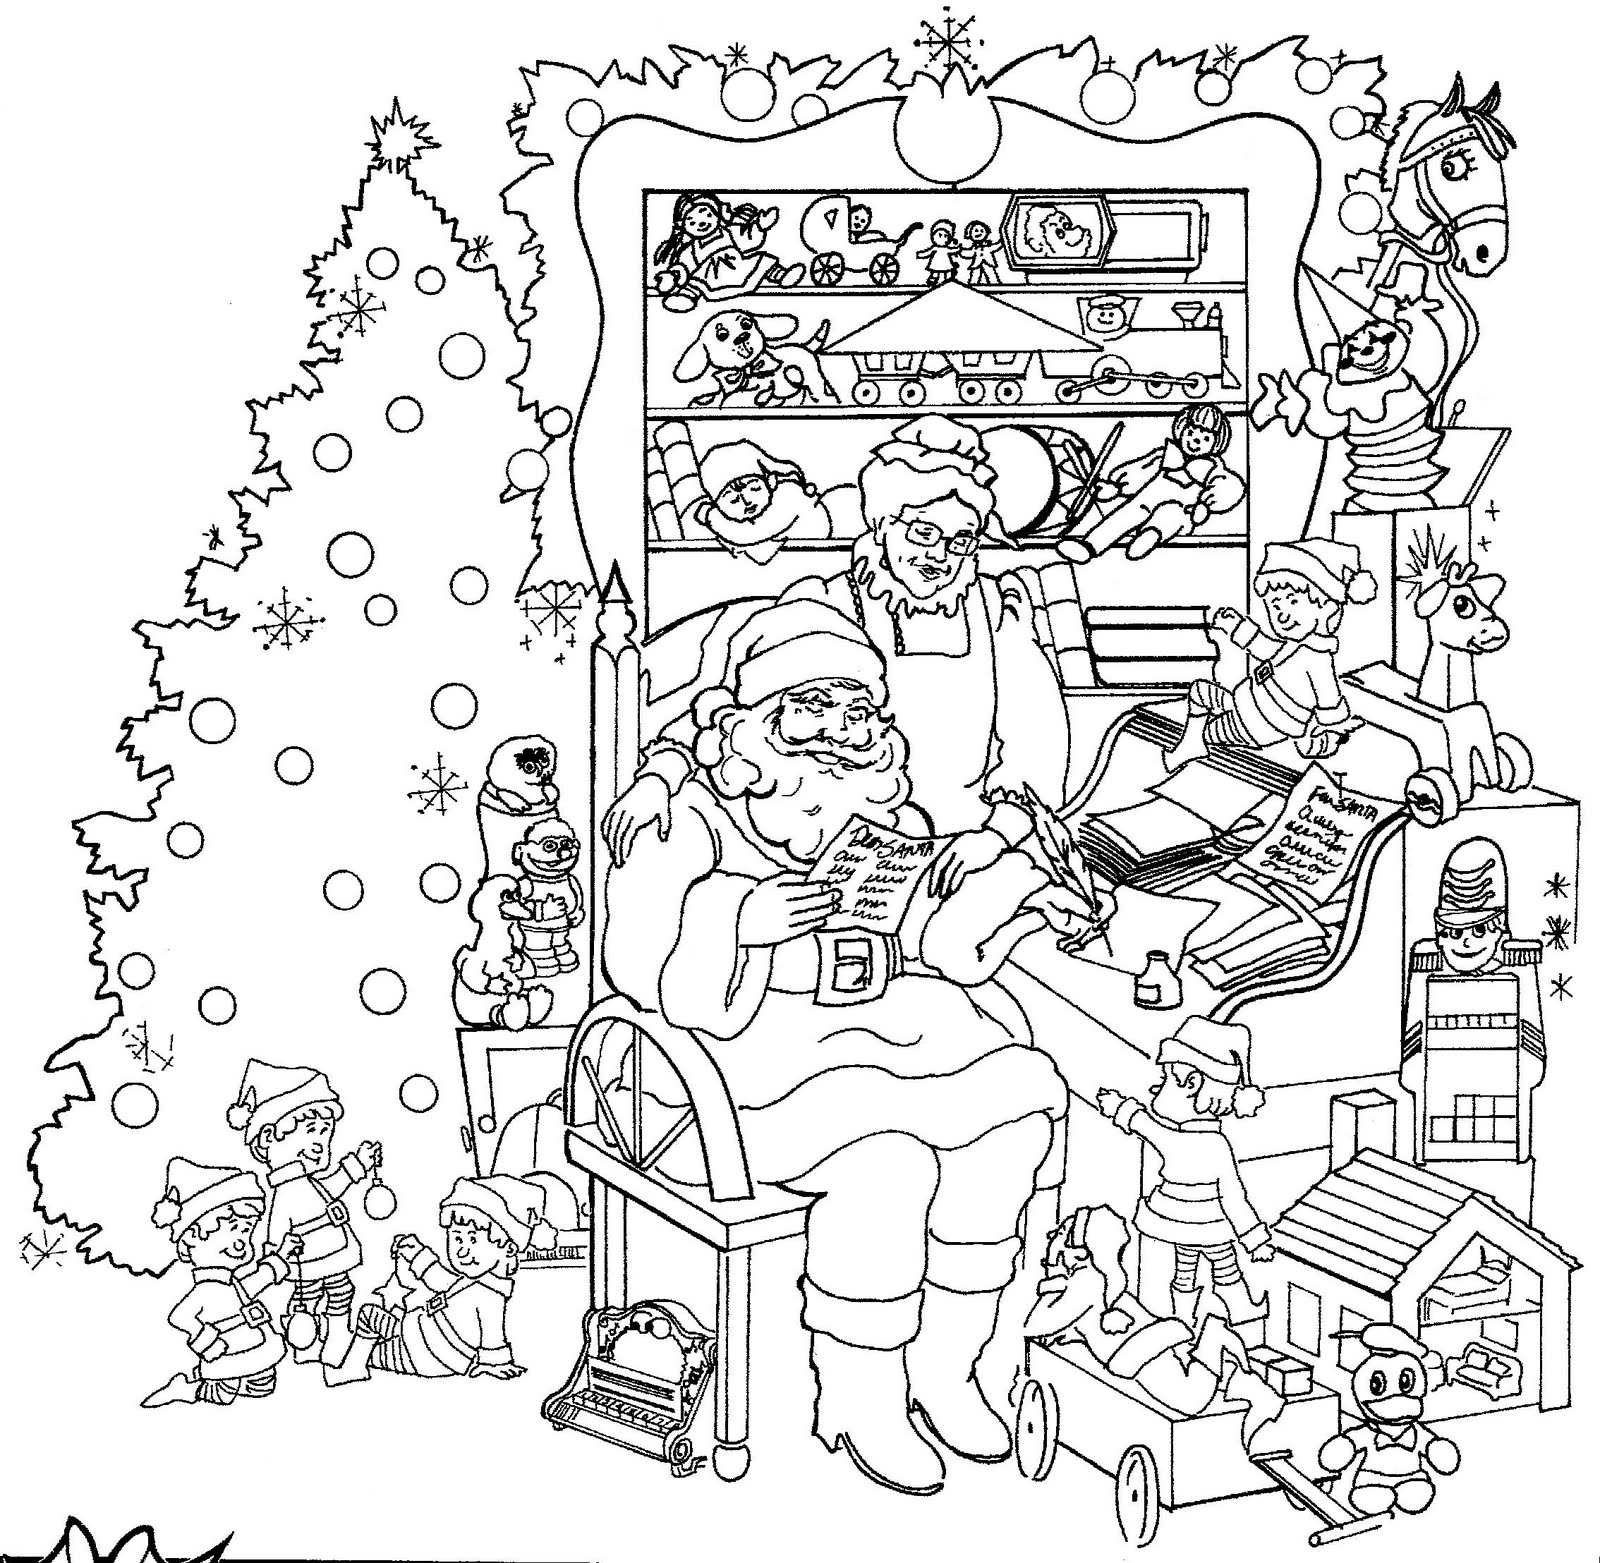 Christmas Coloring Contest 1981